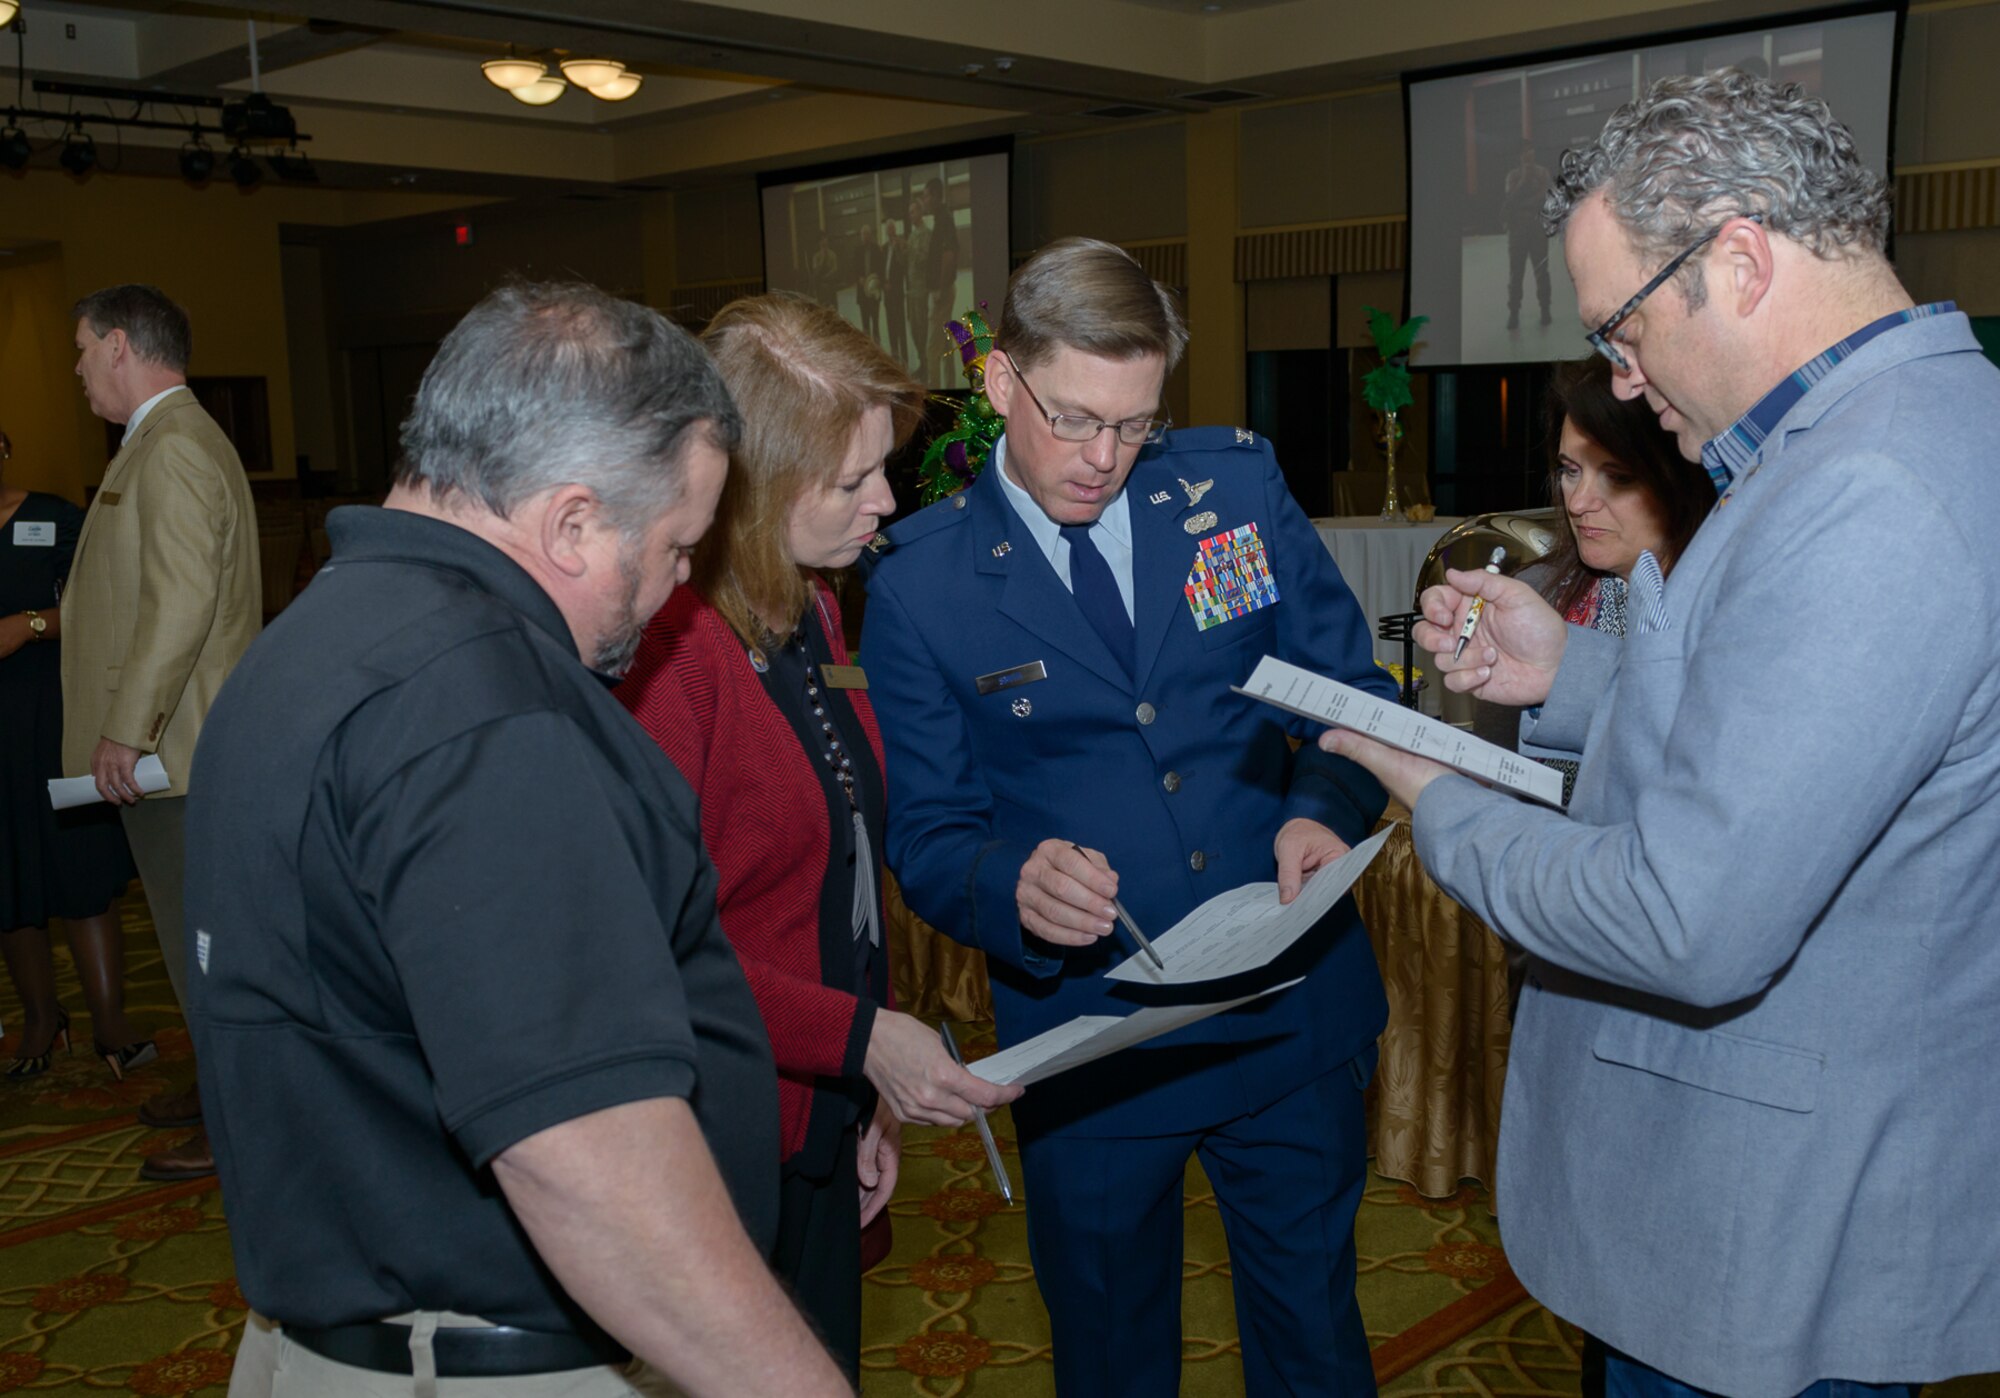 Col. Mike Smith, 81st Training Wing vice commander, assists honorary commanders in an icebreaker game during the 2018 Honorary Commanders Induction Ceremony at the Bay Breeze Event Center Jan. 26, 2018, on Keesler Air Force Base, Mississippi. The event recognized the newest members of Keesler’s honorary commanders program, which is a partnership between base leadership and local civic leaders to promote strong ties between military and civilian leaders. (U.S. Air Force photo by André Askew)